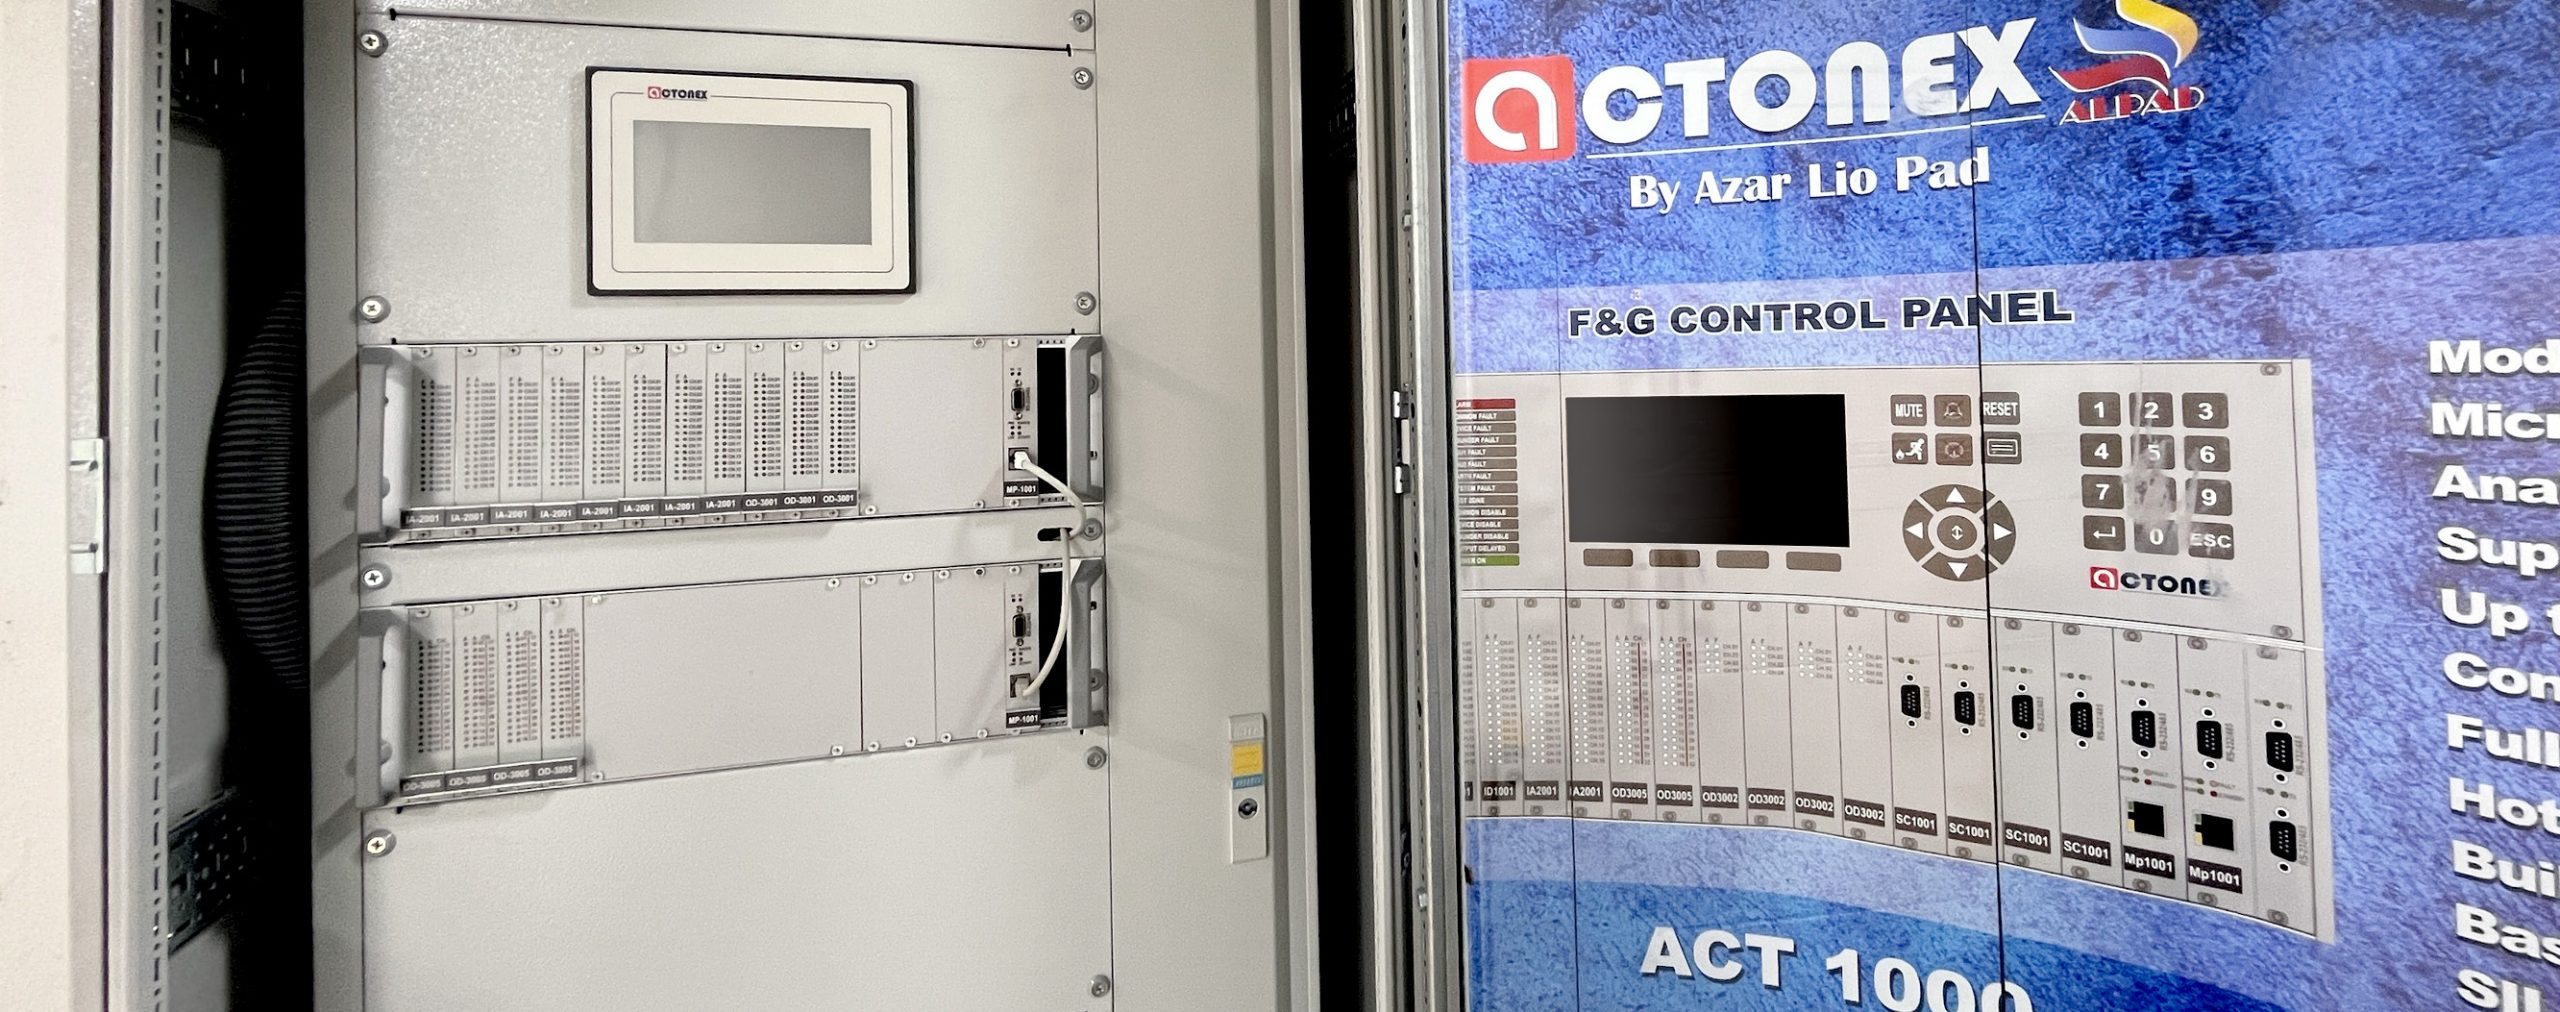 fire and gas control system-f&g control panel-Actonex-act-1000